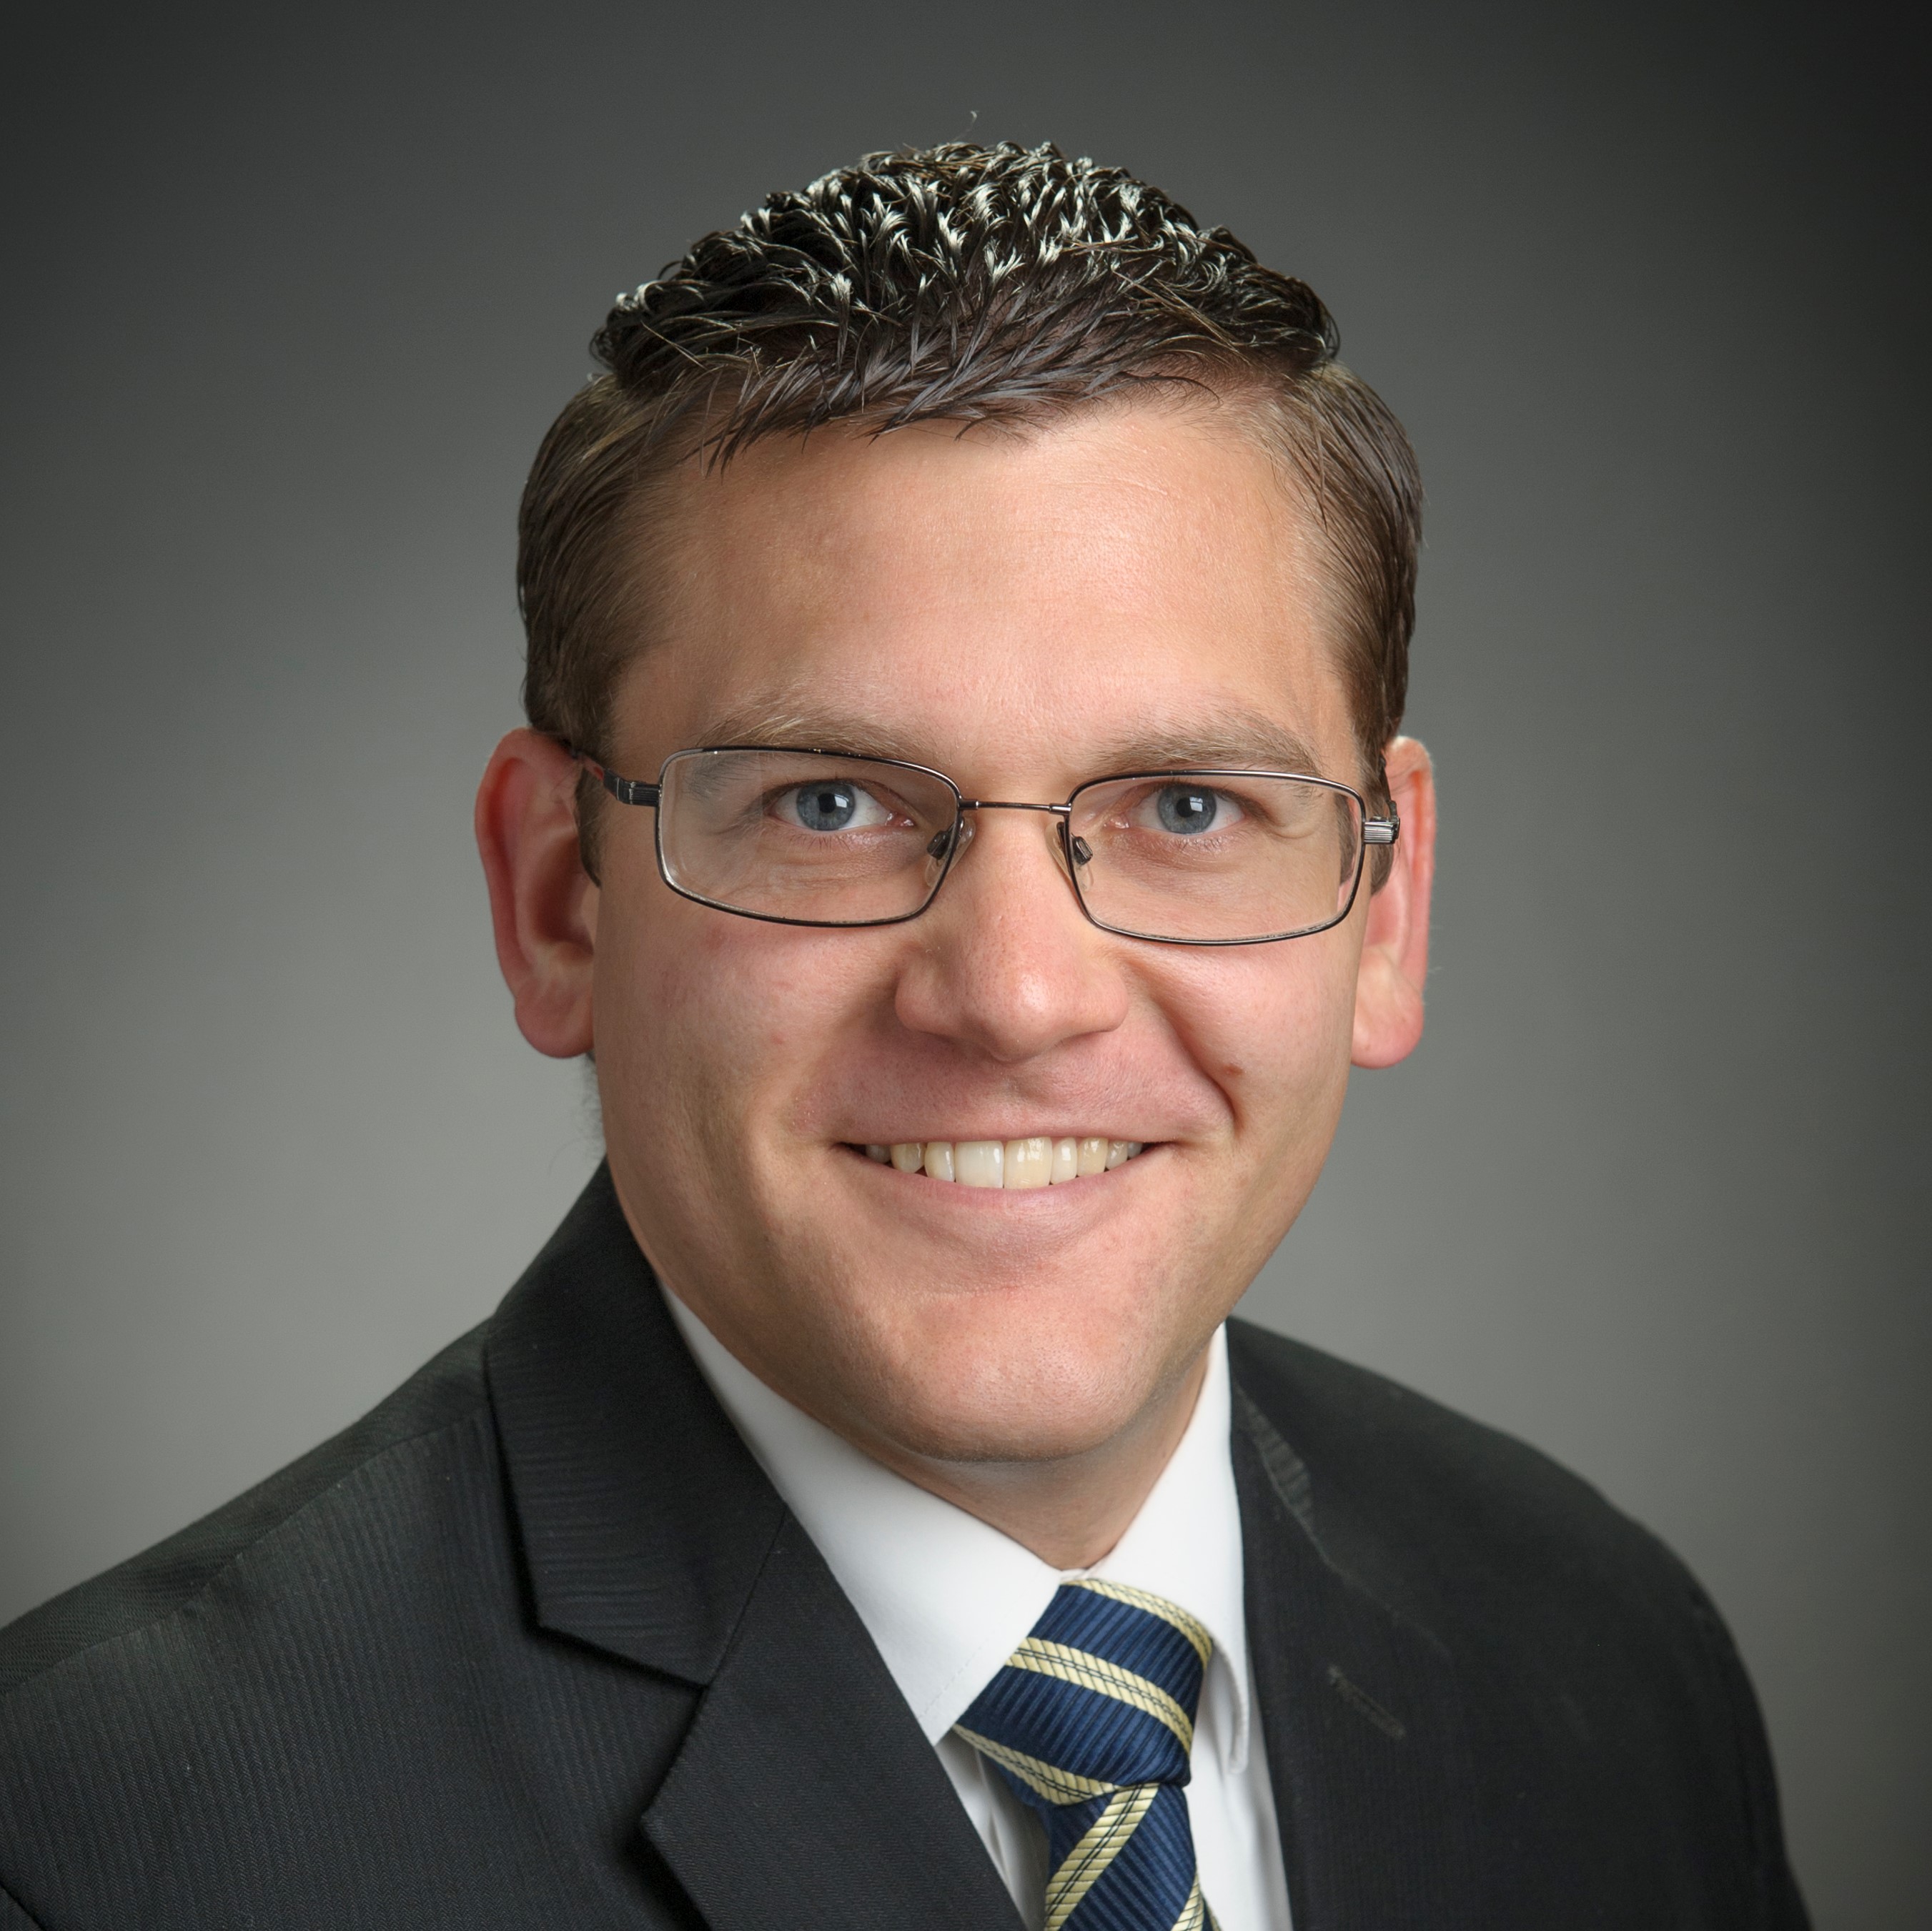 Caucasian man with short dark hair wearing a suit, tie and glasses with a gray background.